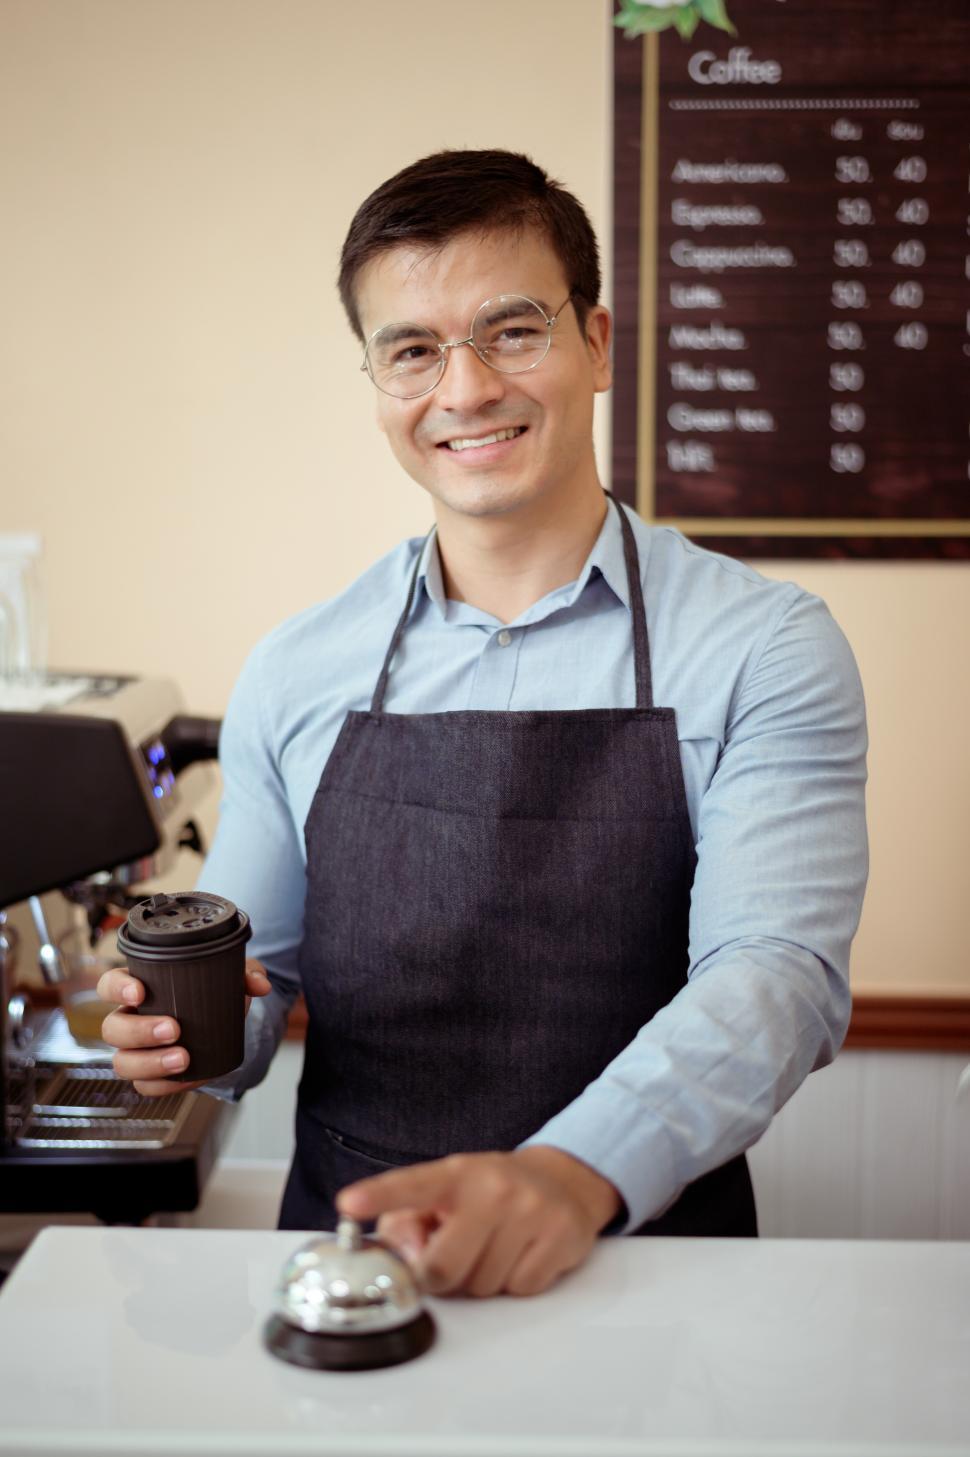 Free Image of Baristas holds a to-go cup full of coffee and has a finger on the service bell 